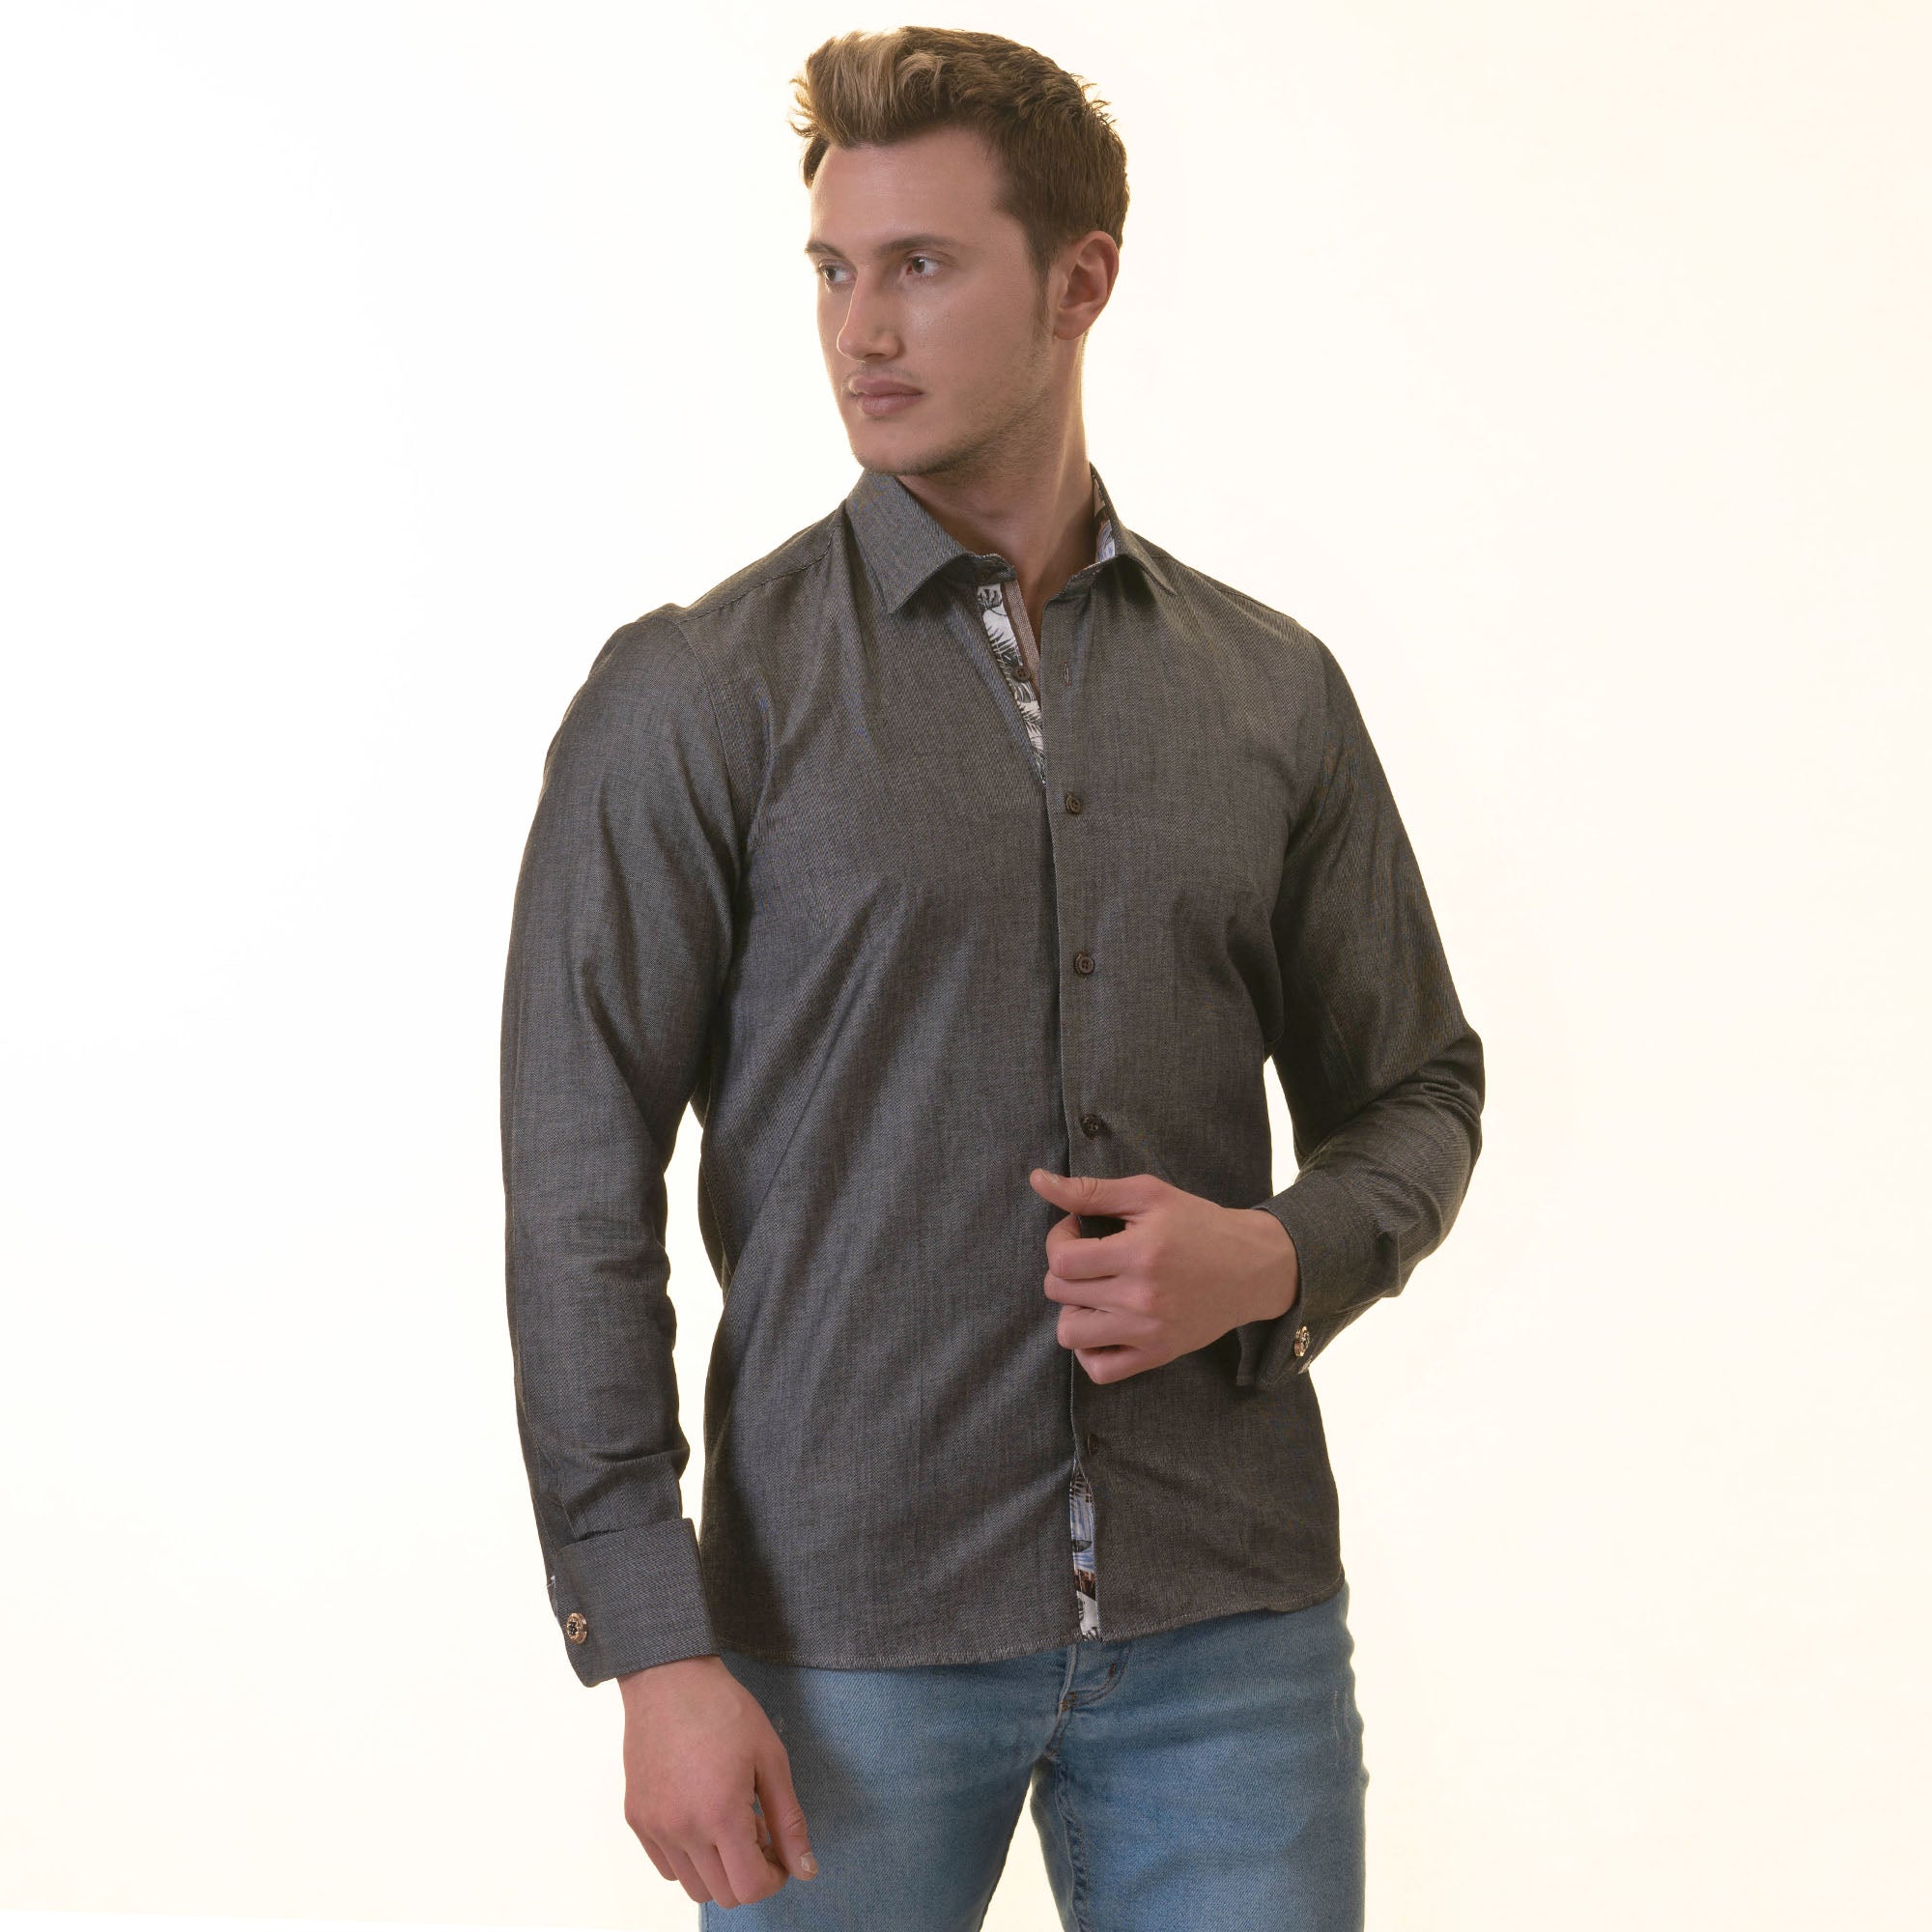 Gray inside Tropical Printed Mens Slim Fit Designer French Cuff Shirt - tailored Cotton Shirts for Work and Casual Wear